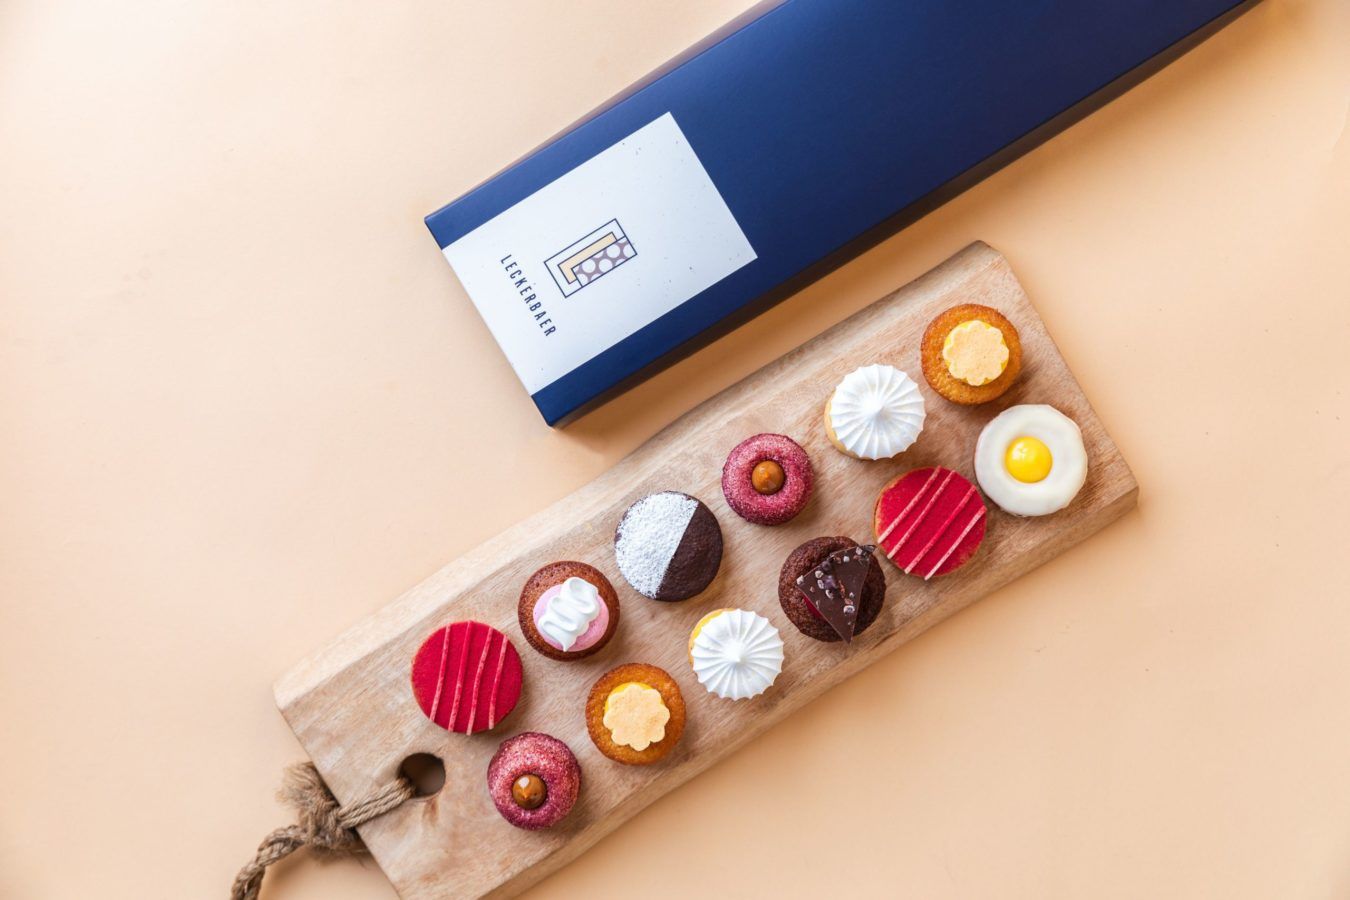 8 best dessert boxes in Singapore for an indulgent sweet treat